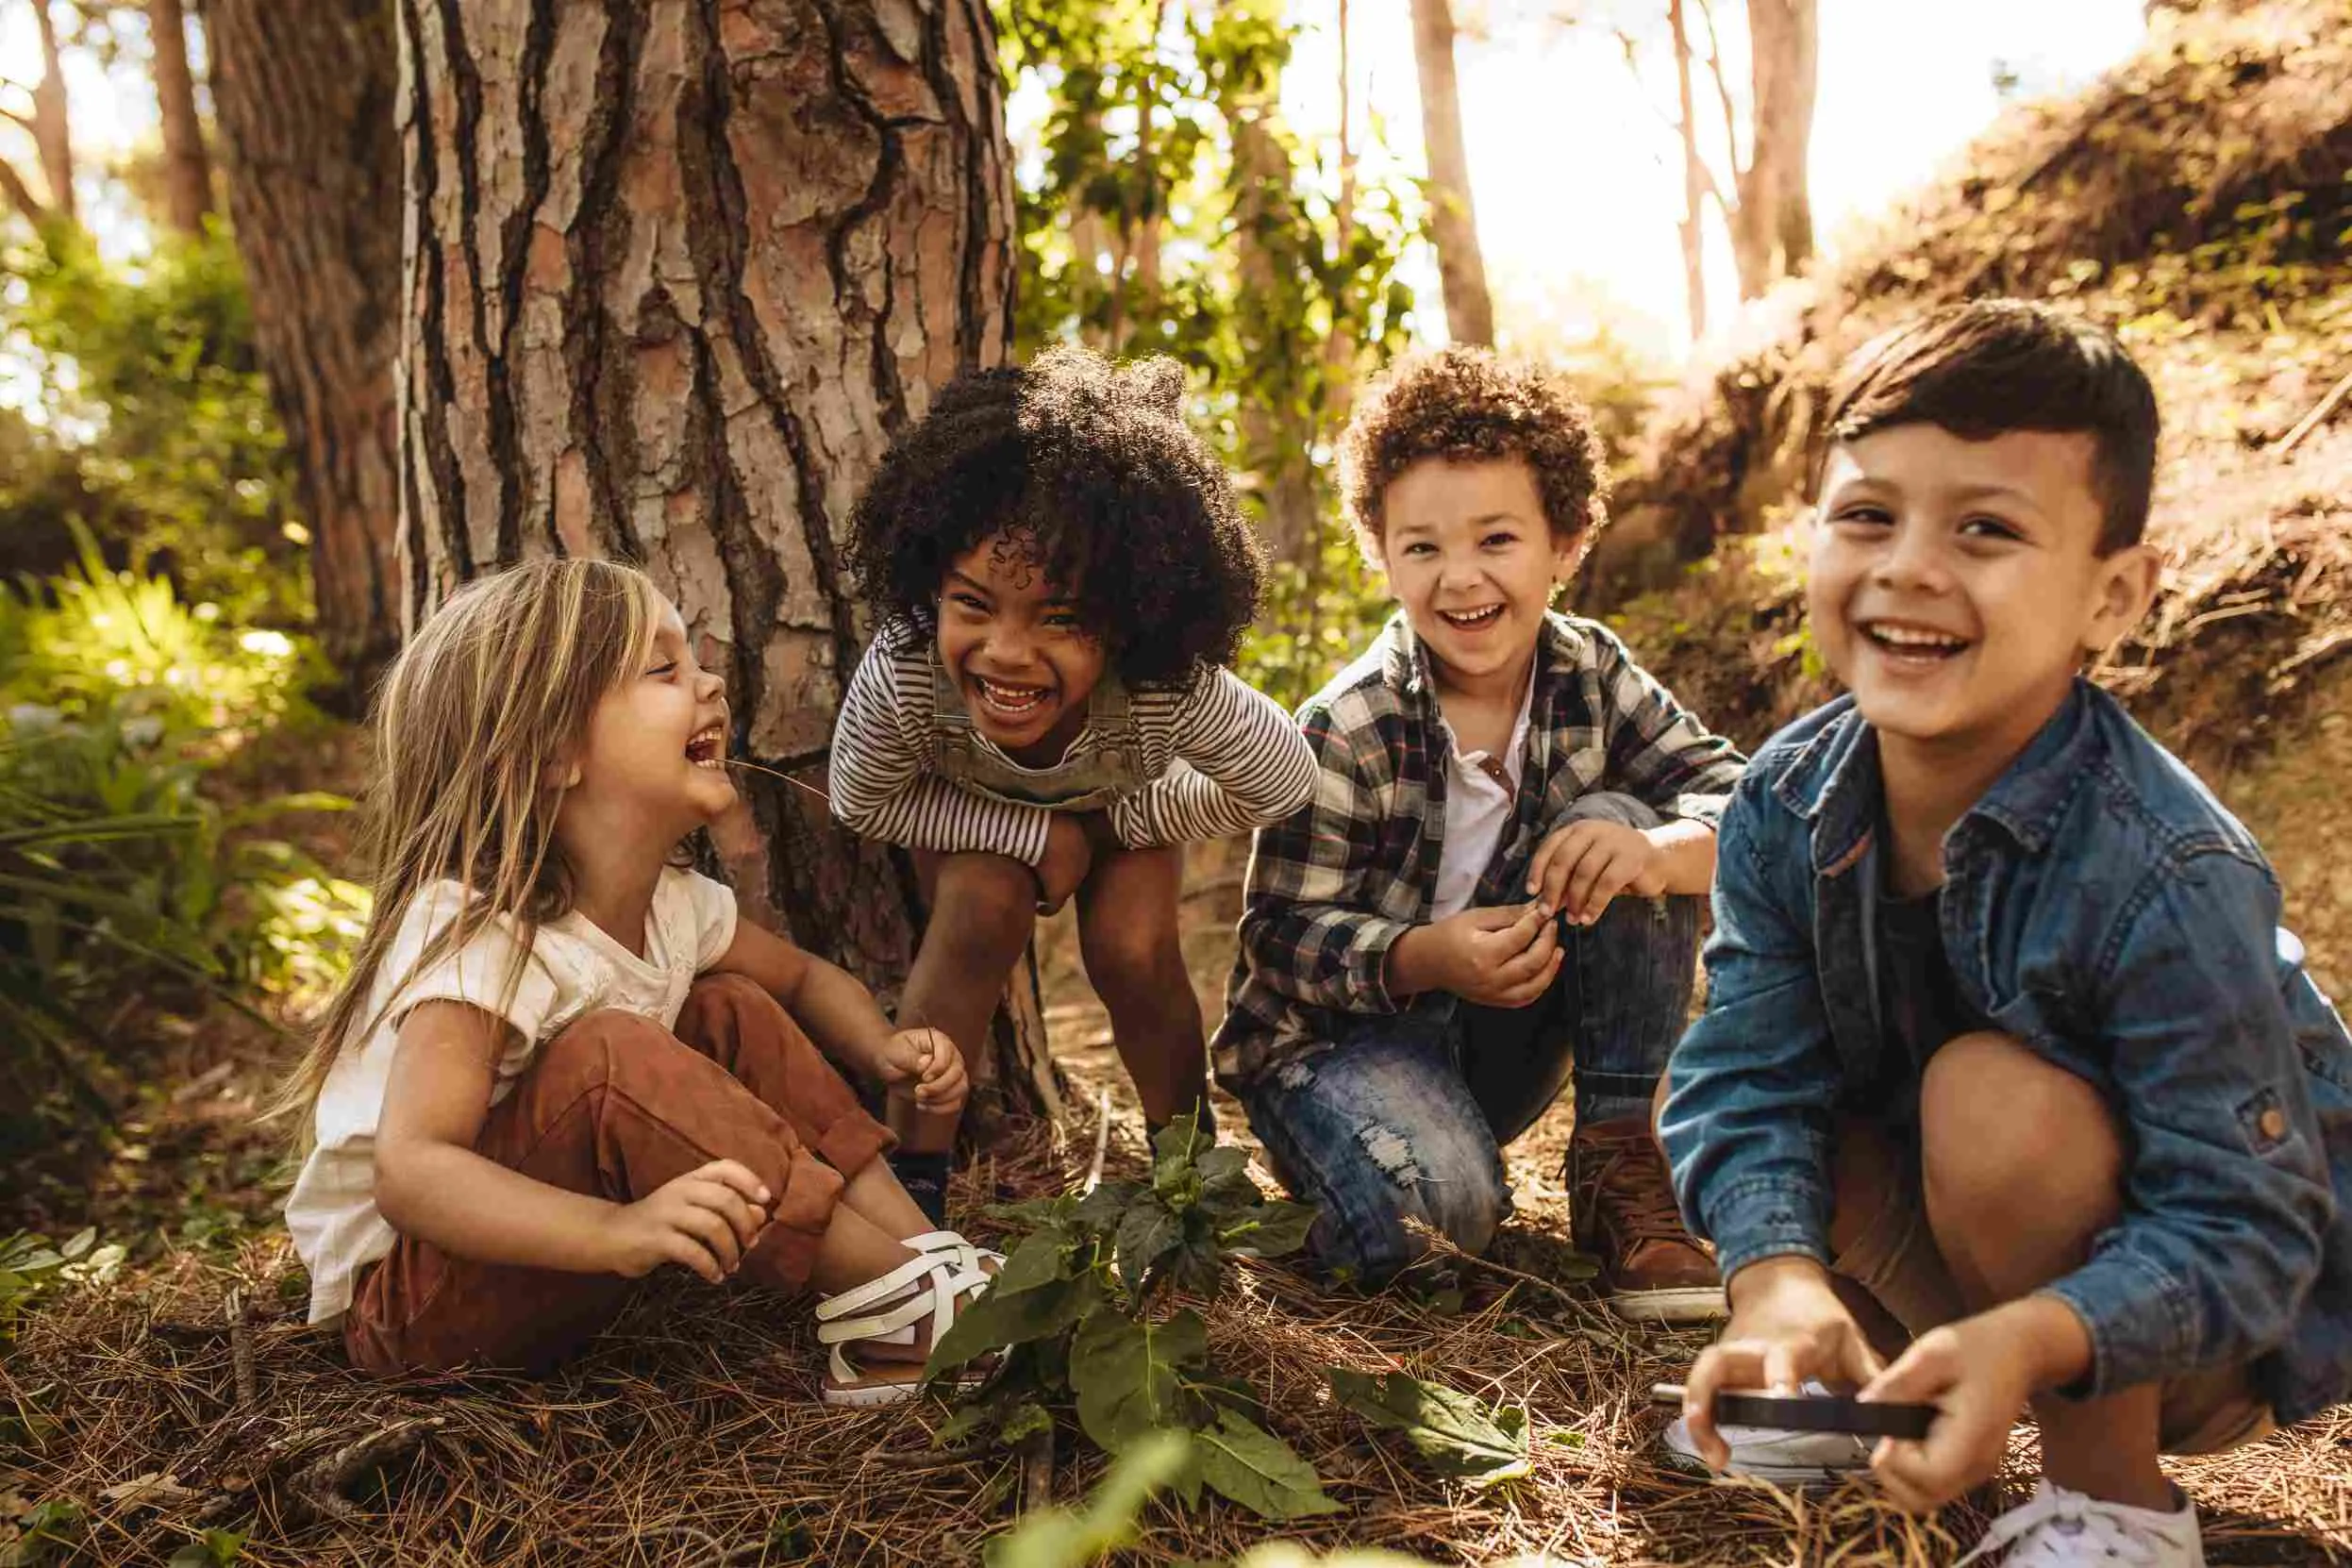 Four children crouched on the forest floor, smiling and laughing.